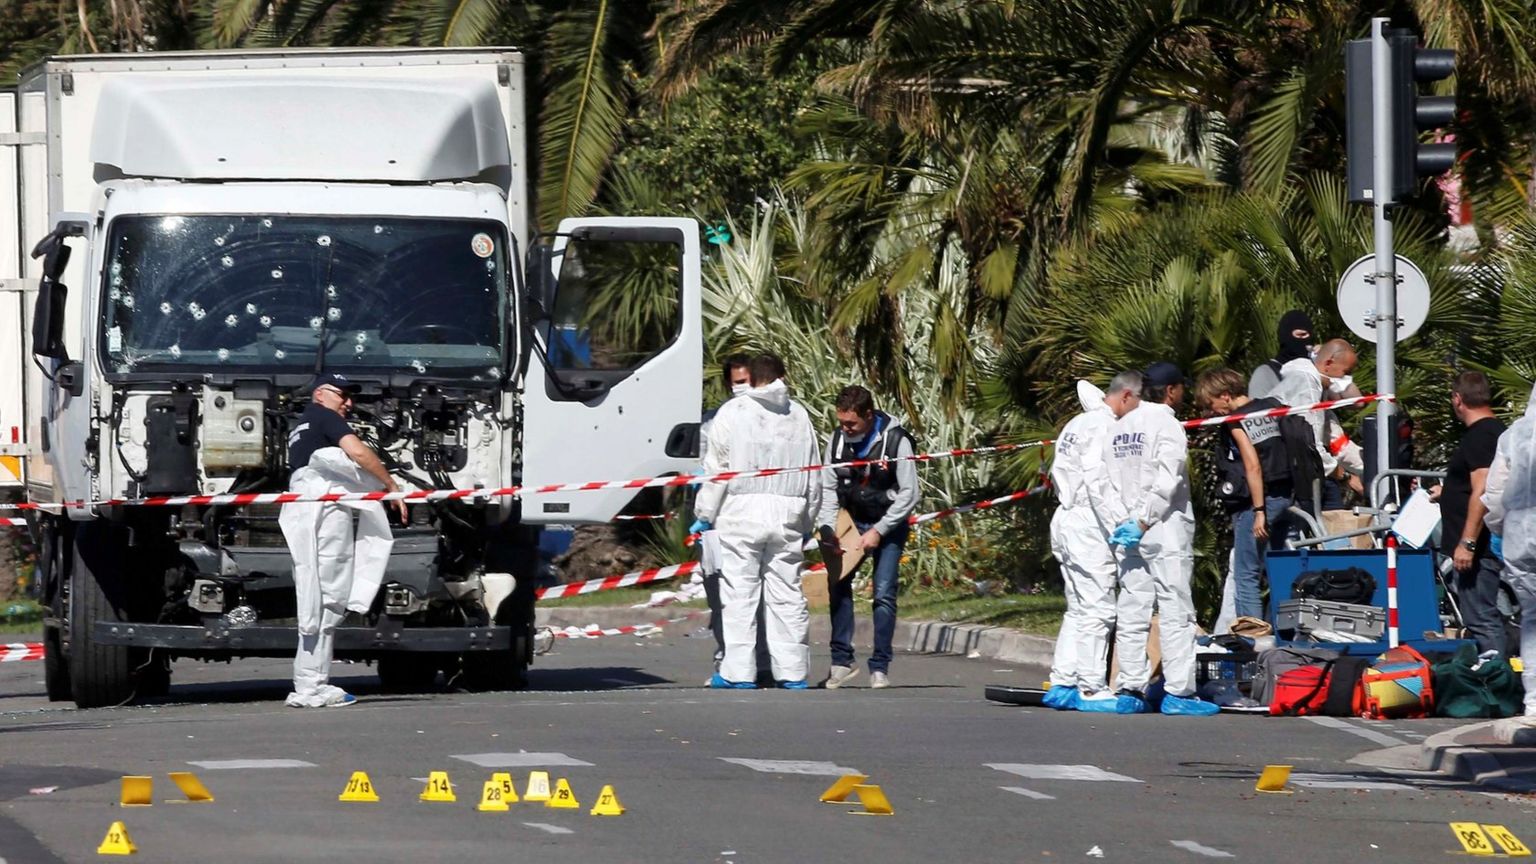 A lorry riddled with bullets after an attack in Nice, France